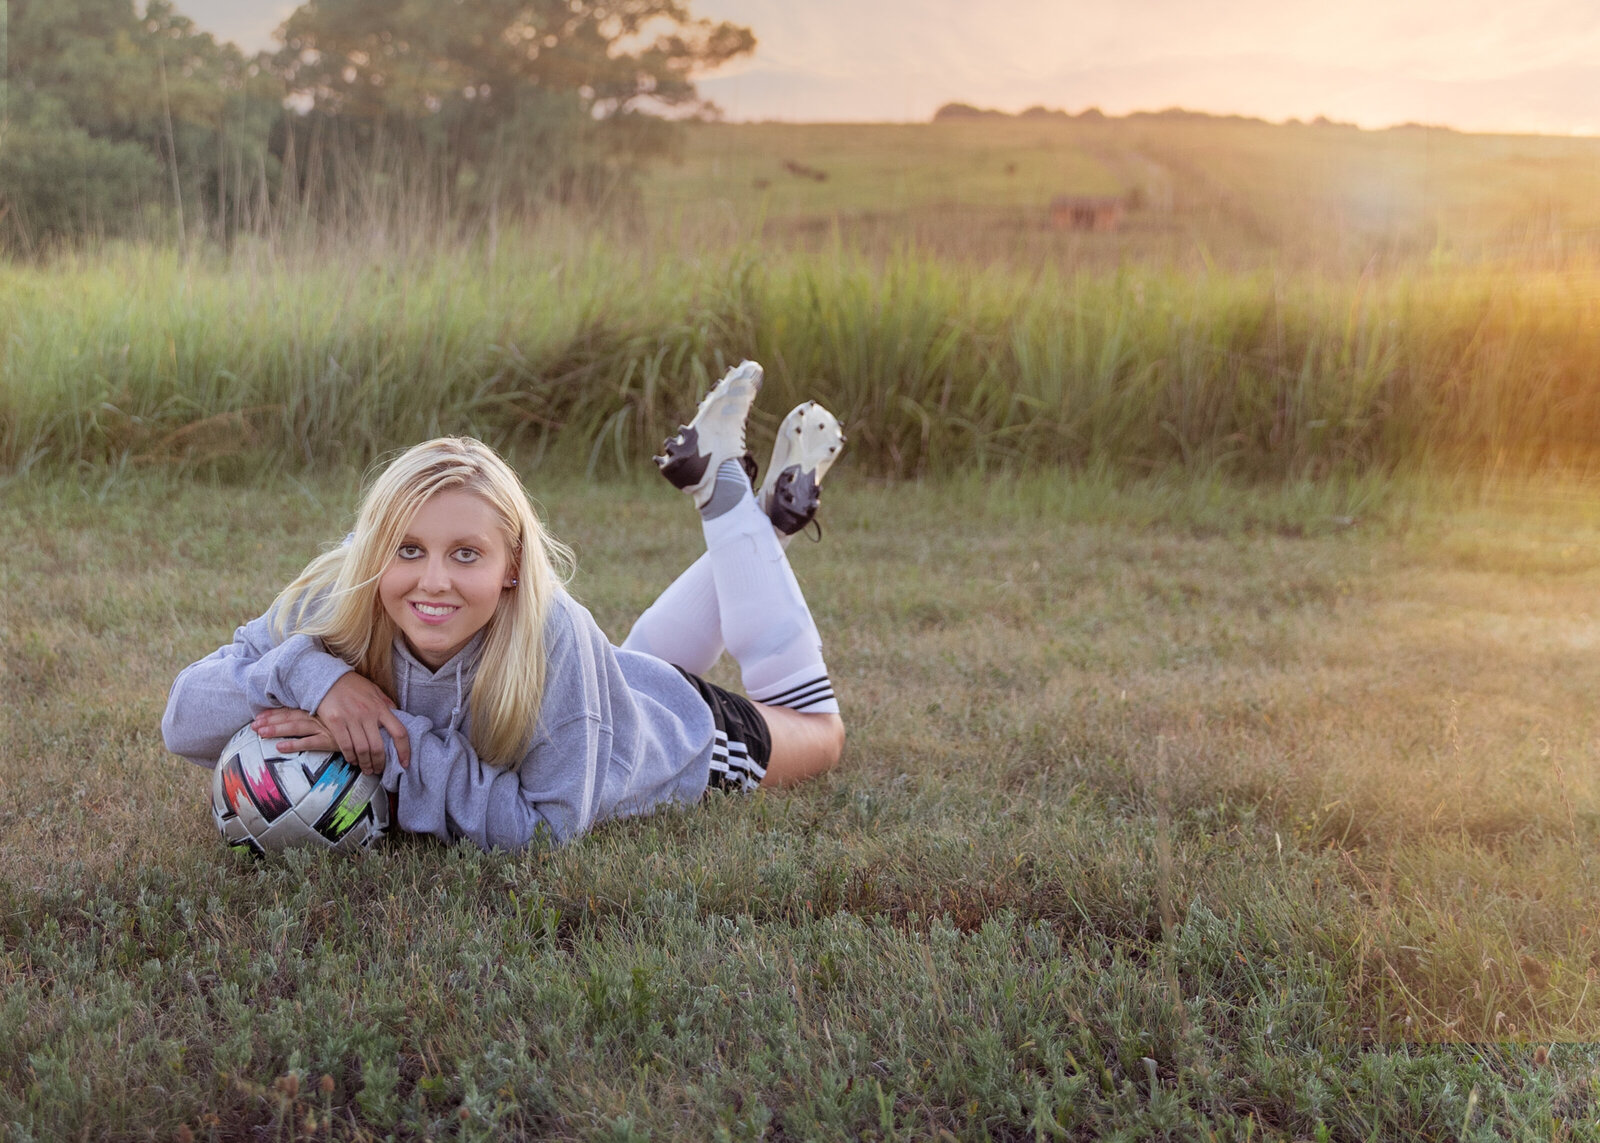 Jorrian lays on the ground holding her soccer ball